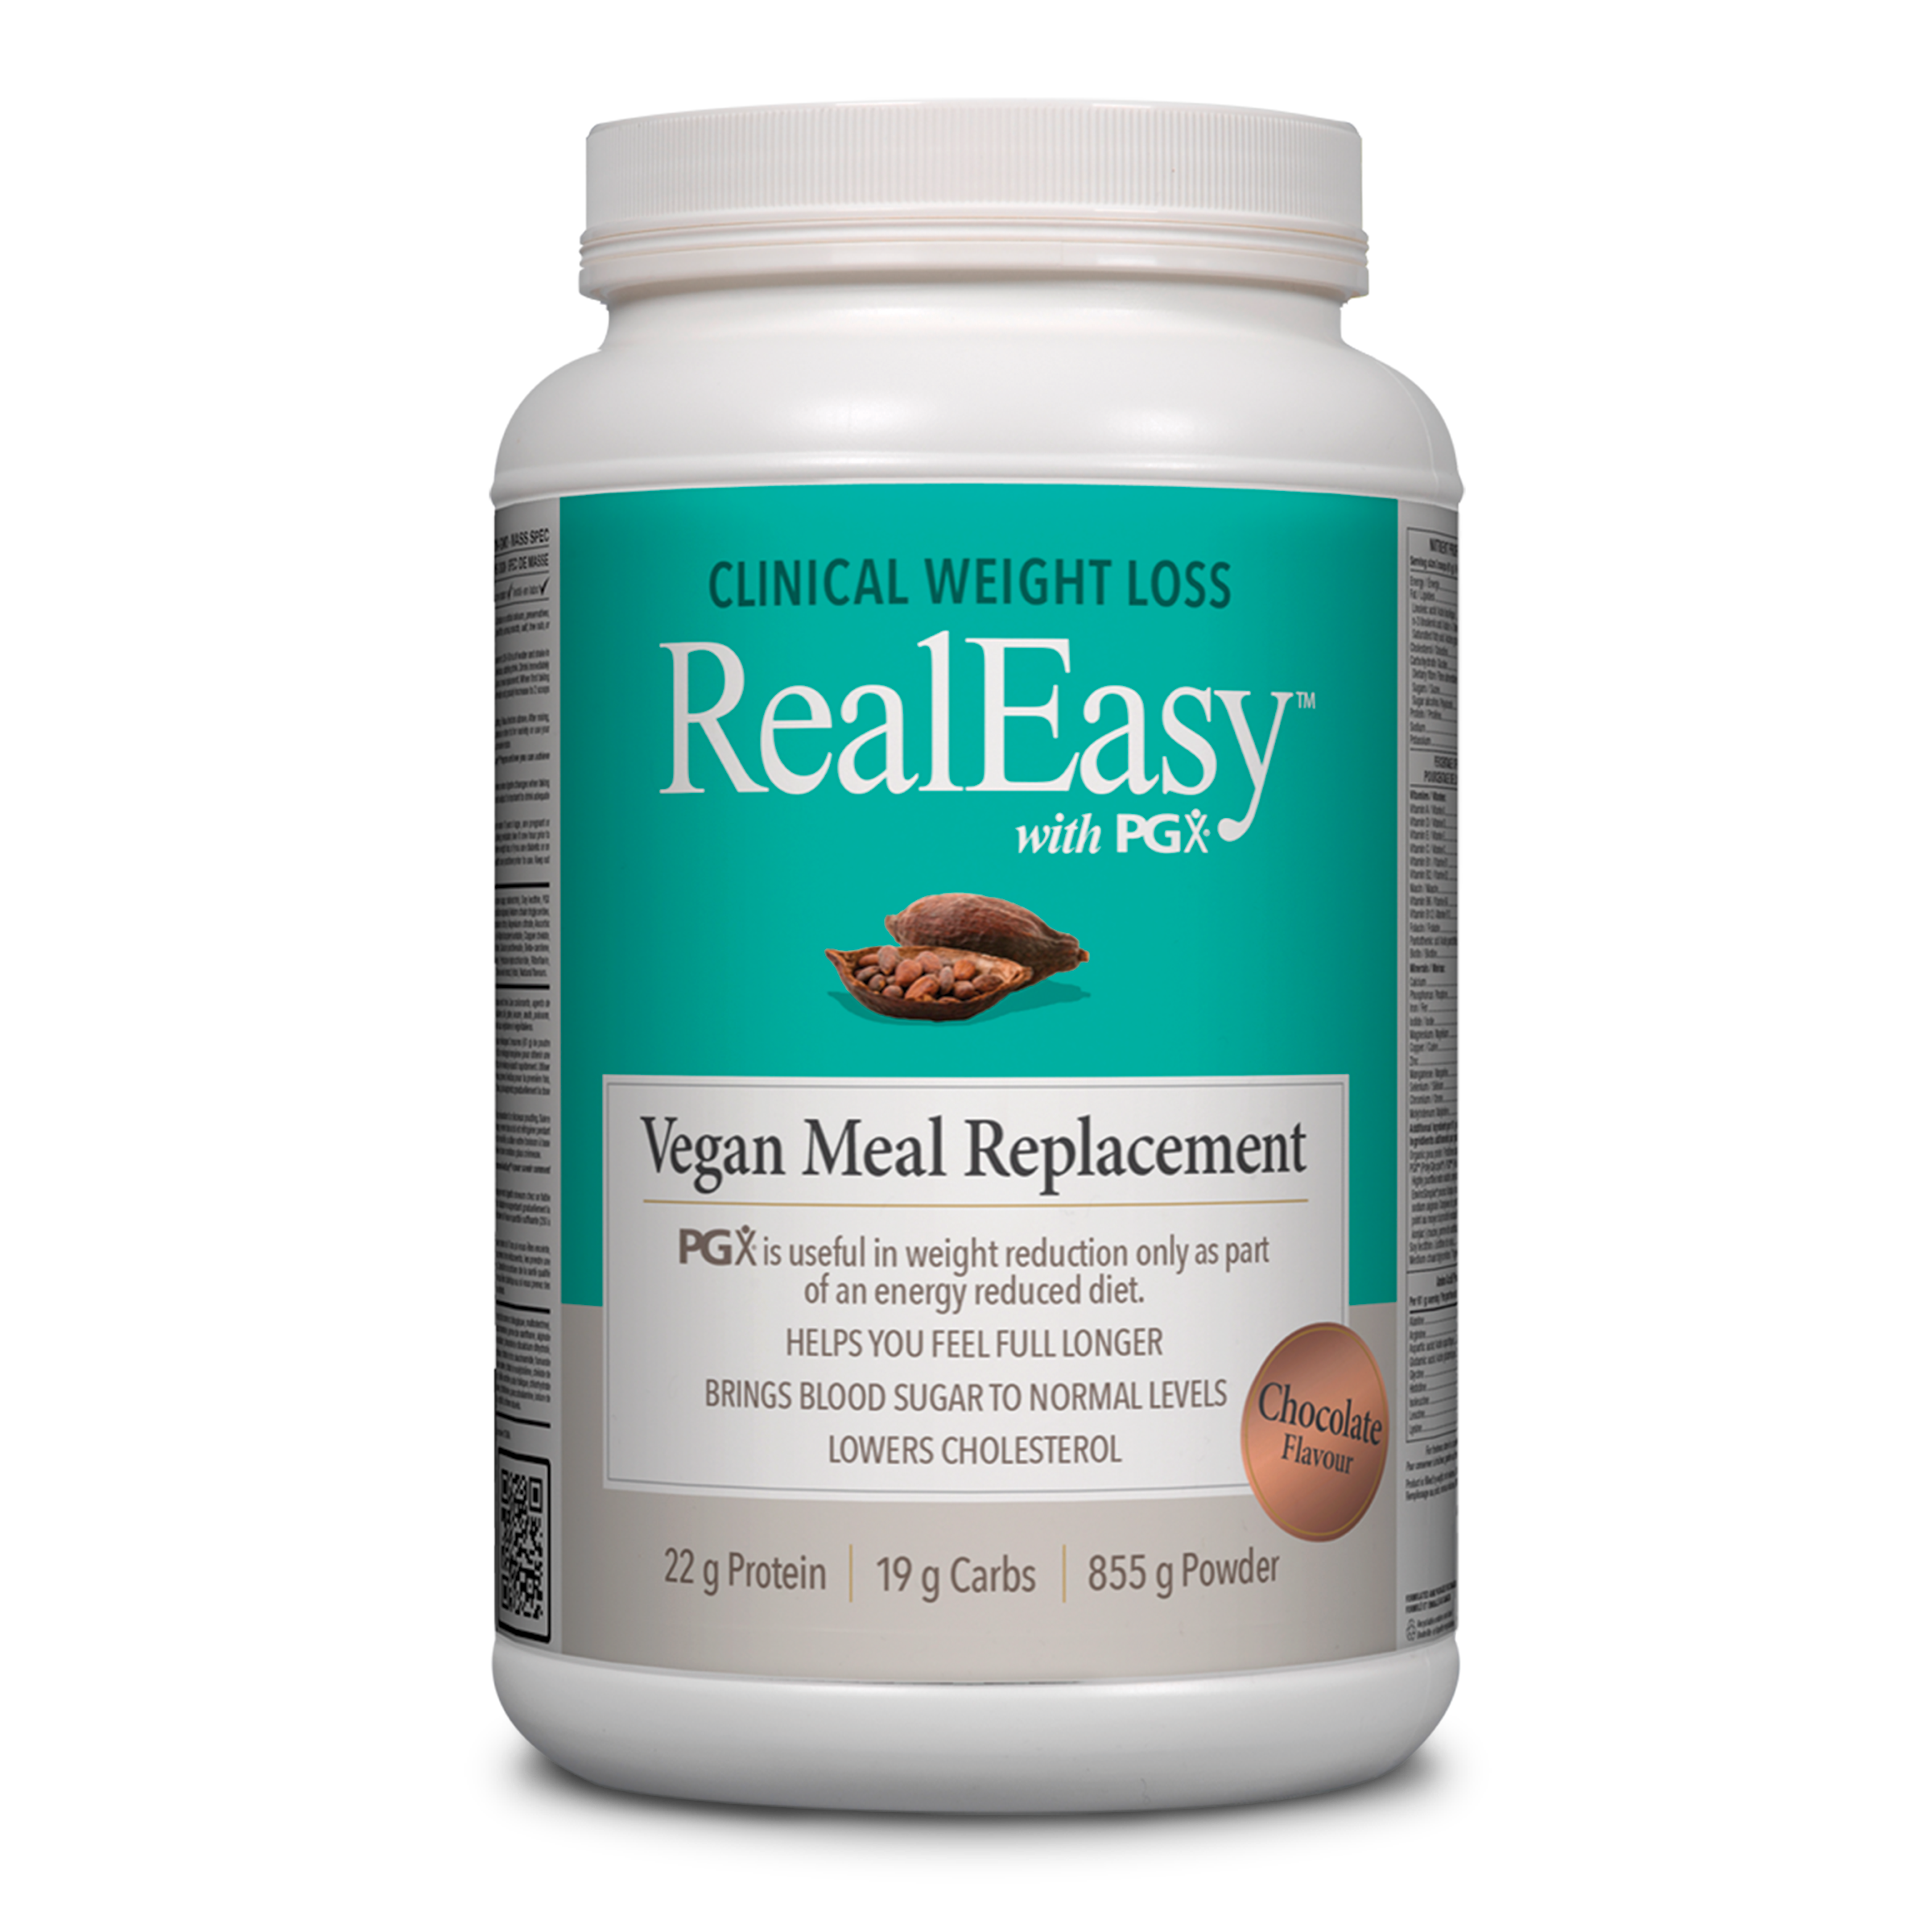 Natural Factors RealEasy Chocolate PGX Vegan Meal Replacement 855g